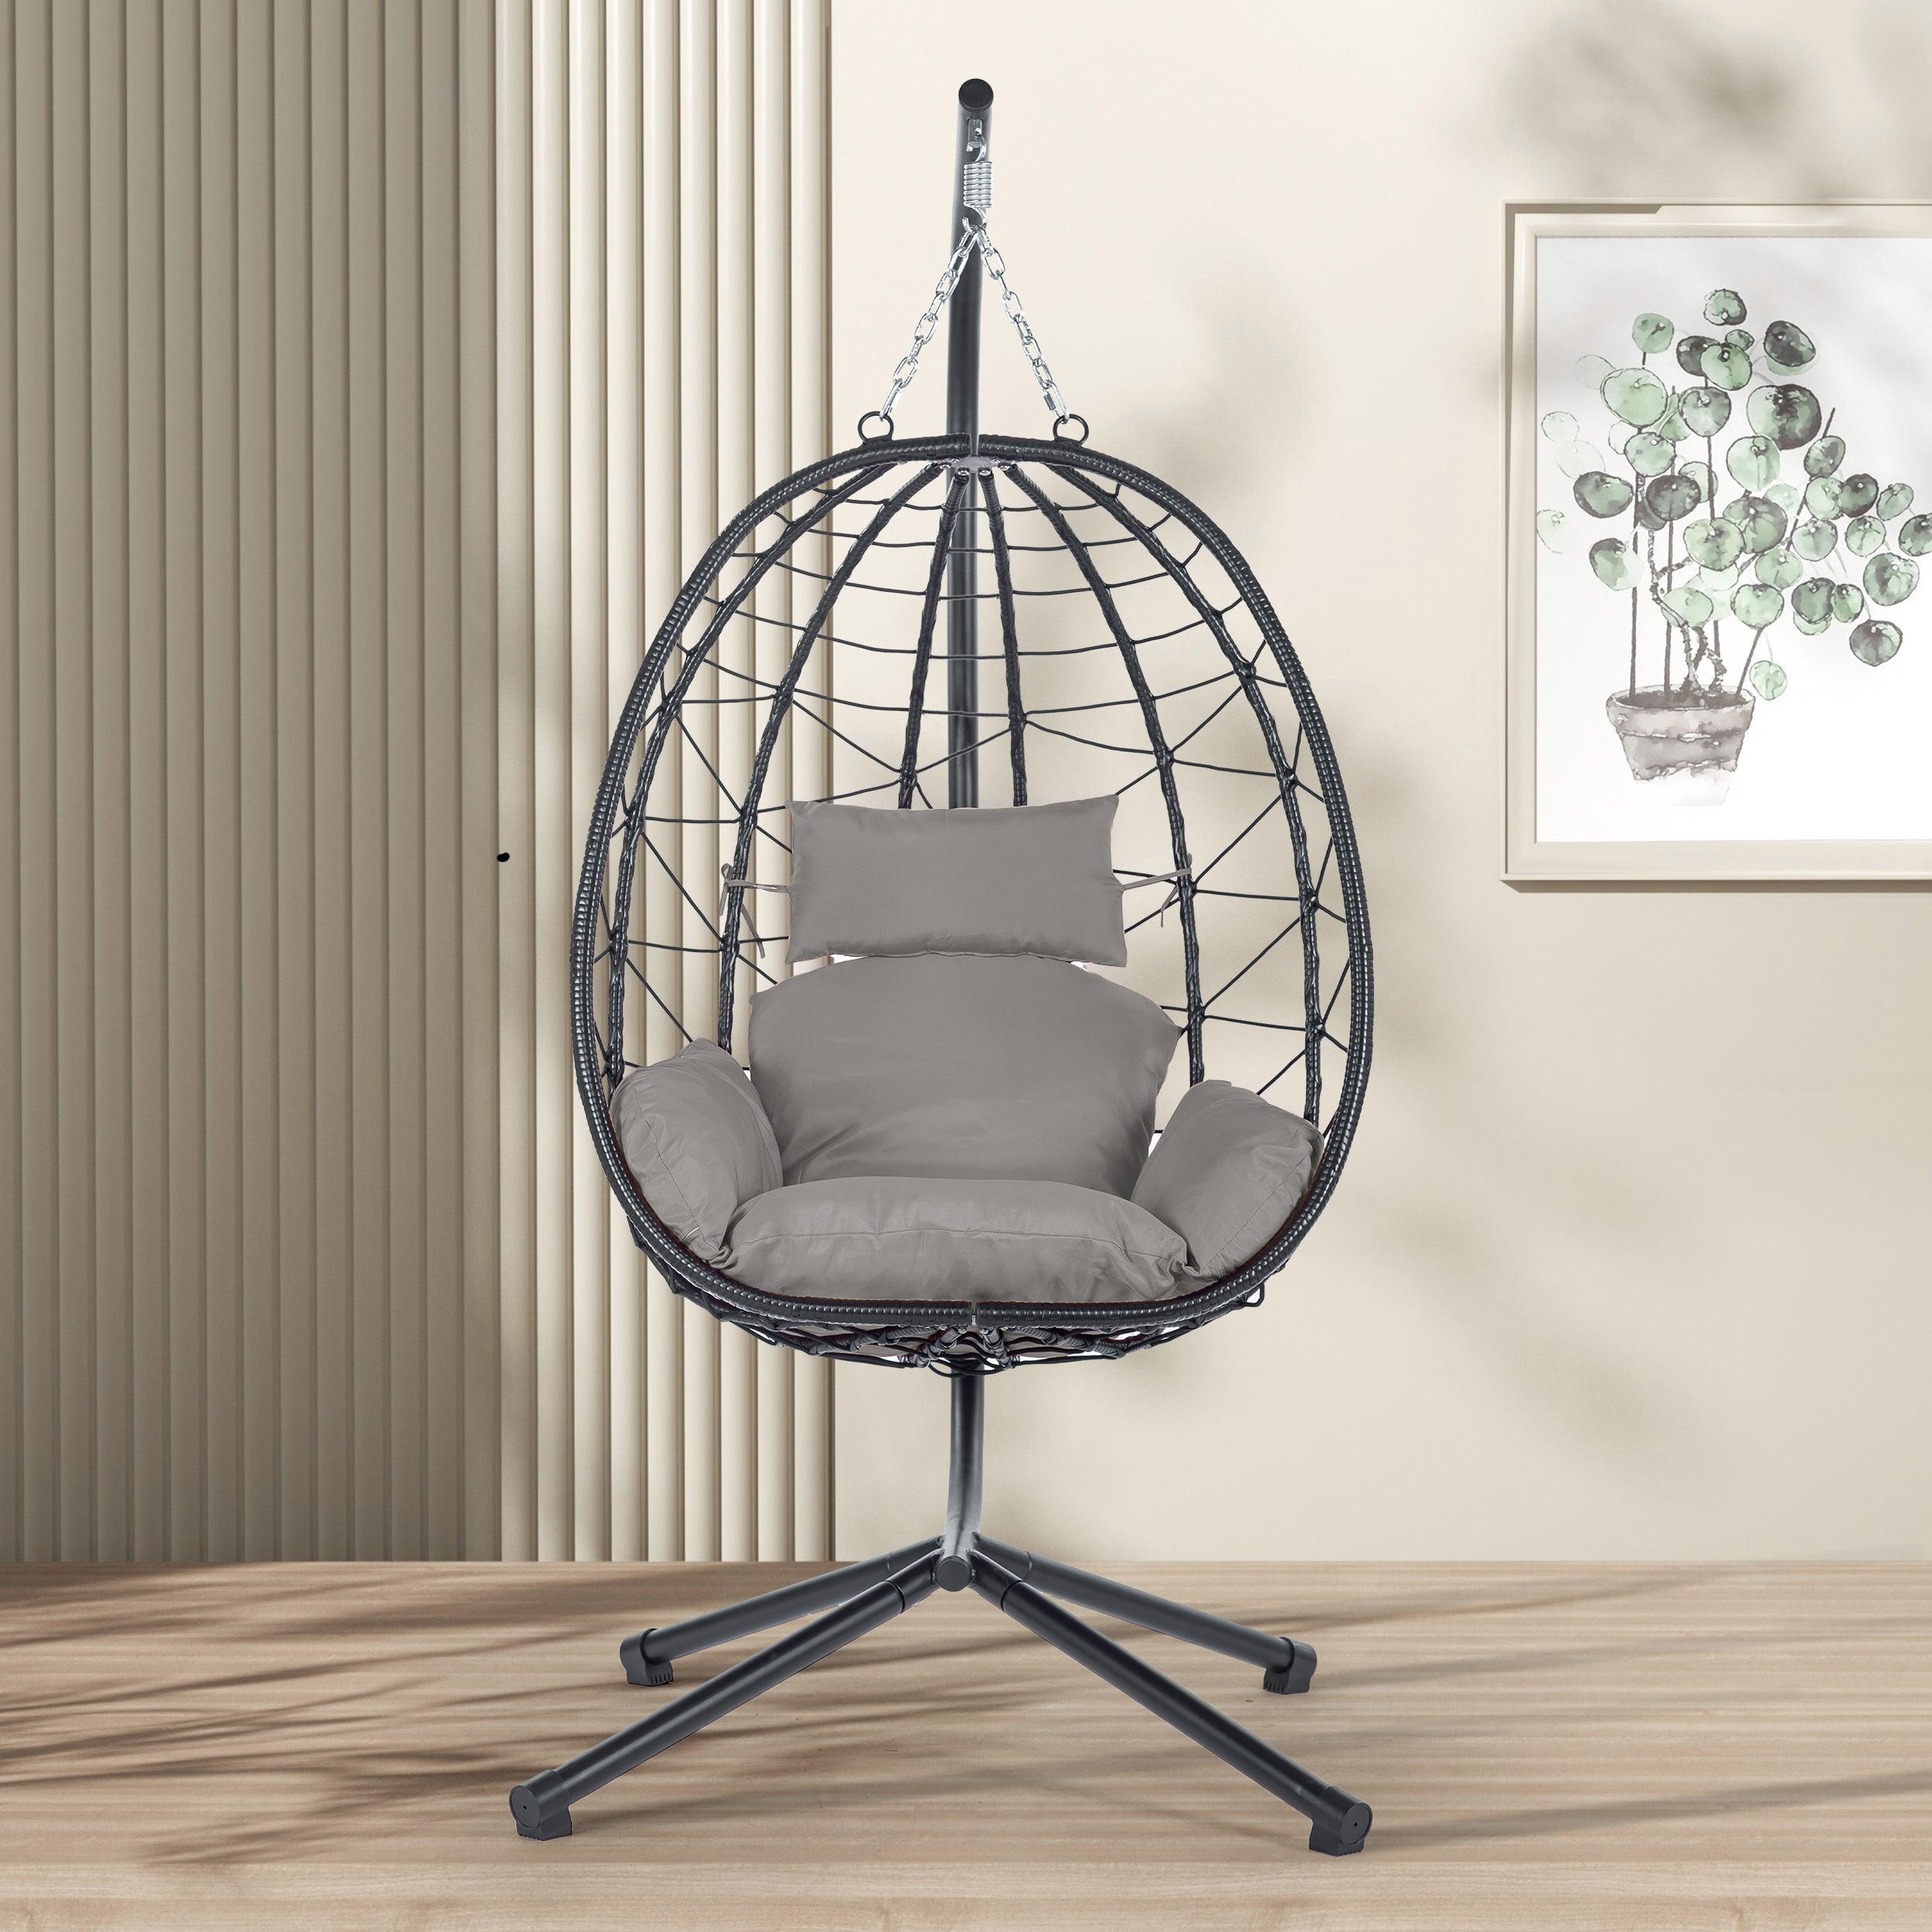 🆓🚛 Egg Chair with Stand Indoor Outdoor Swing Chair Patio Wicker Hanging Egg Chair Hanging Basket Chair Hammock Chair with Stand for Bedroom Living Room Balcony